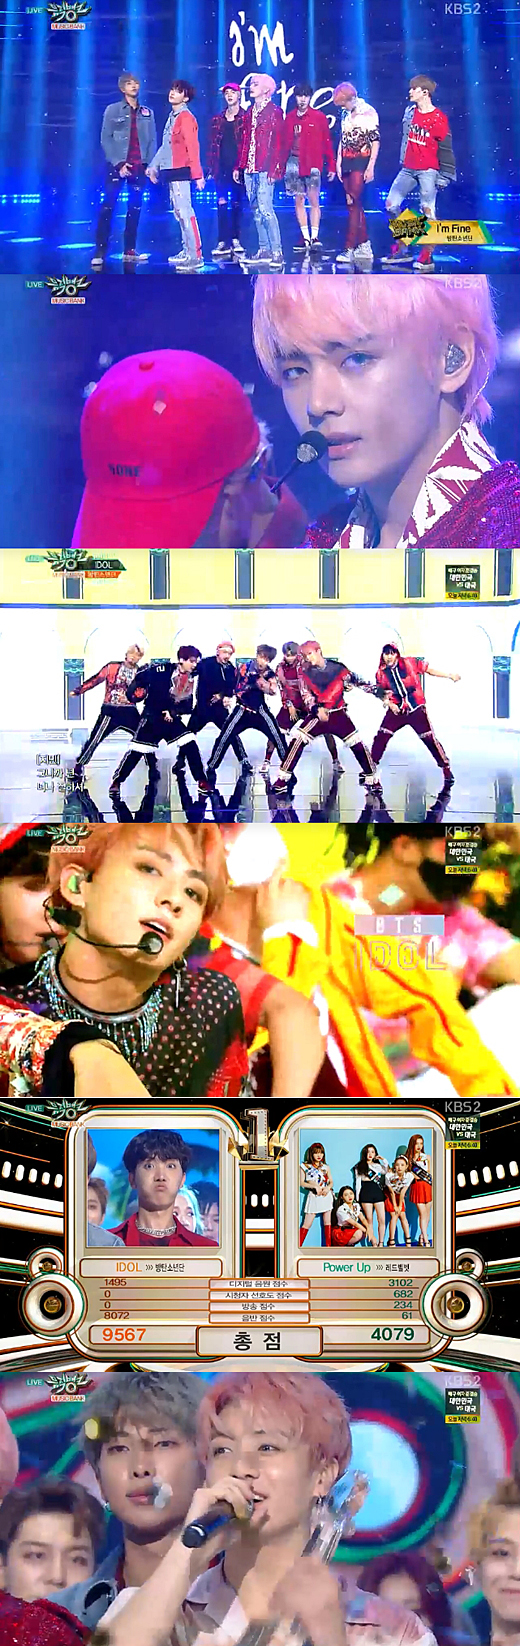 Korea representative Idol group BTS (RM Sugar Jean J. Hop Jimin V government) won the first trophy.BTS was released as the number one player on KBS 2TVs Music Bank on the afternoon of the 31st, beating Girl Group Red Velvets Power Up with the song Idol (IDOL).It is the first number one music broadcast to receive as Idol; BTS was particularly grateful to fan club Ami after winning the trophy.Idol is the title song of BTS repackaged album LOVE YOURSELF -Answer.It is a new song of BTS, which is popular all over the world beyond Korea. It is showing off the power of K-pop representative Idol group by winning various charts at the same time as the announcement.On the other hand, Music Bank on the same day includes (girls) children, IN2IT, MXM, NCT DREAM, SF9, Stray Kids, Go Sung-min, Kim Yong-guk, Nature, Norazo, Laboum, Lime Soda, Reina, Rossi, BTS, Berrygut, Big Flo, Shinhwa, etc. appeared.In particular, Shinhwa made a mature and charismatic performance with a comeback with the title song Kiss Me Like That for the 20th anniversary special album Heart (HEART).